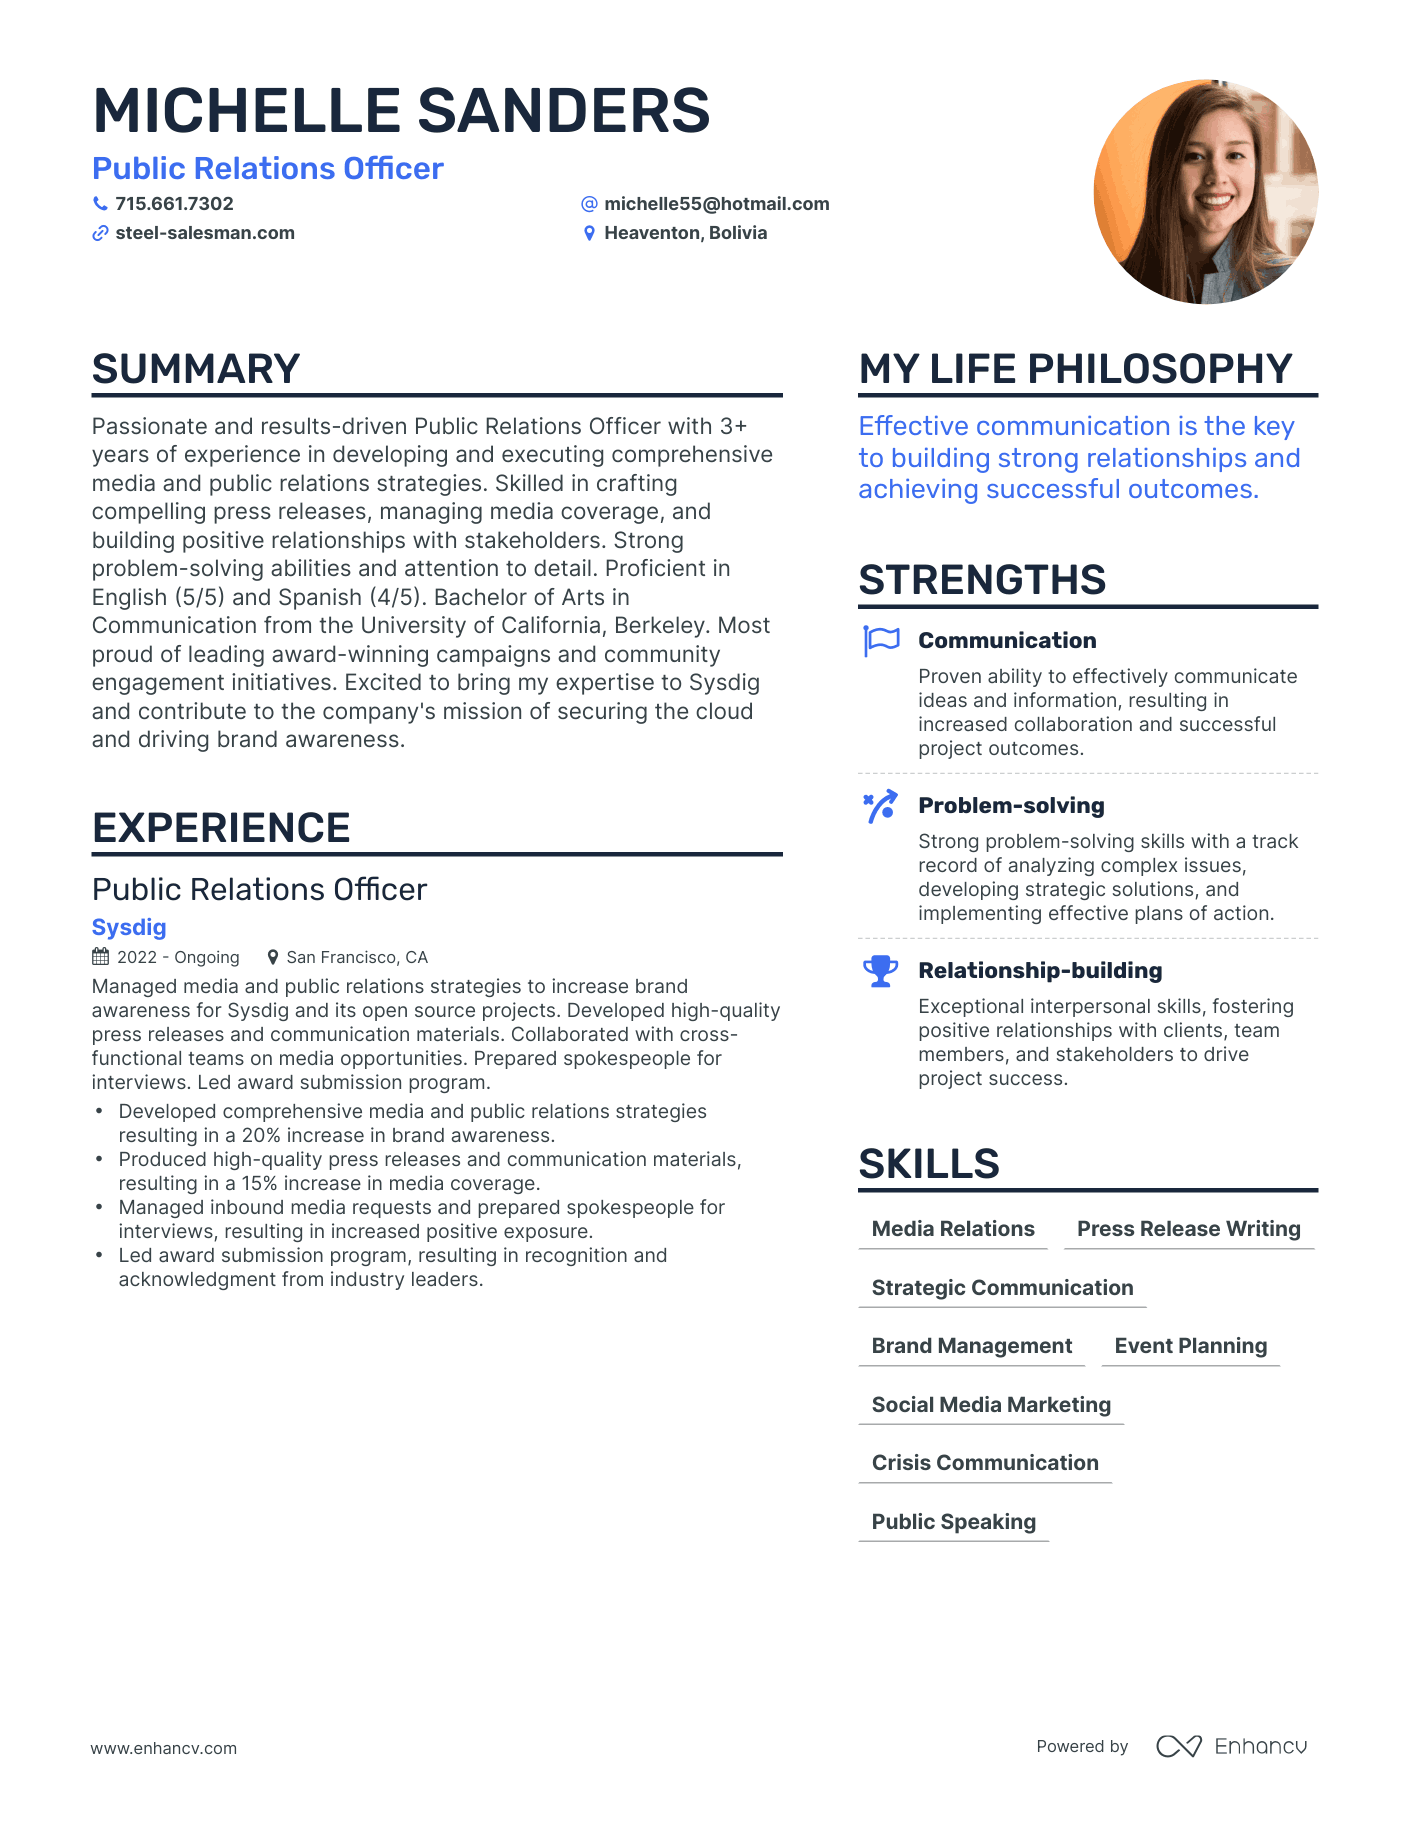 Public Relations Officer resume example